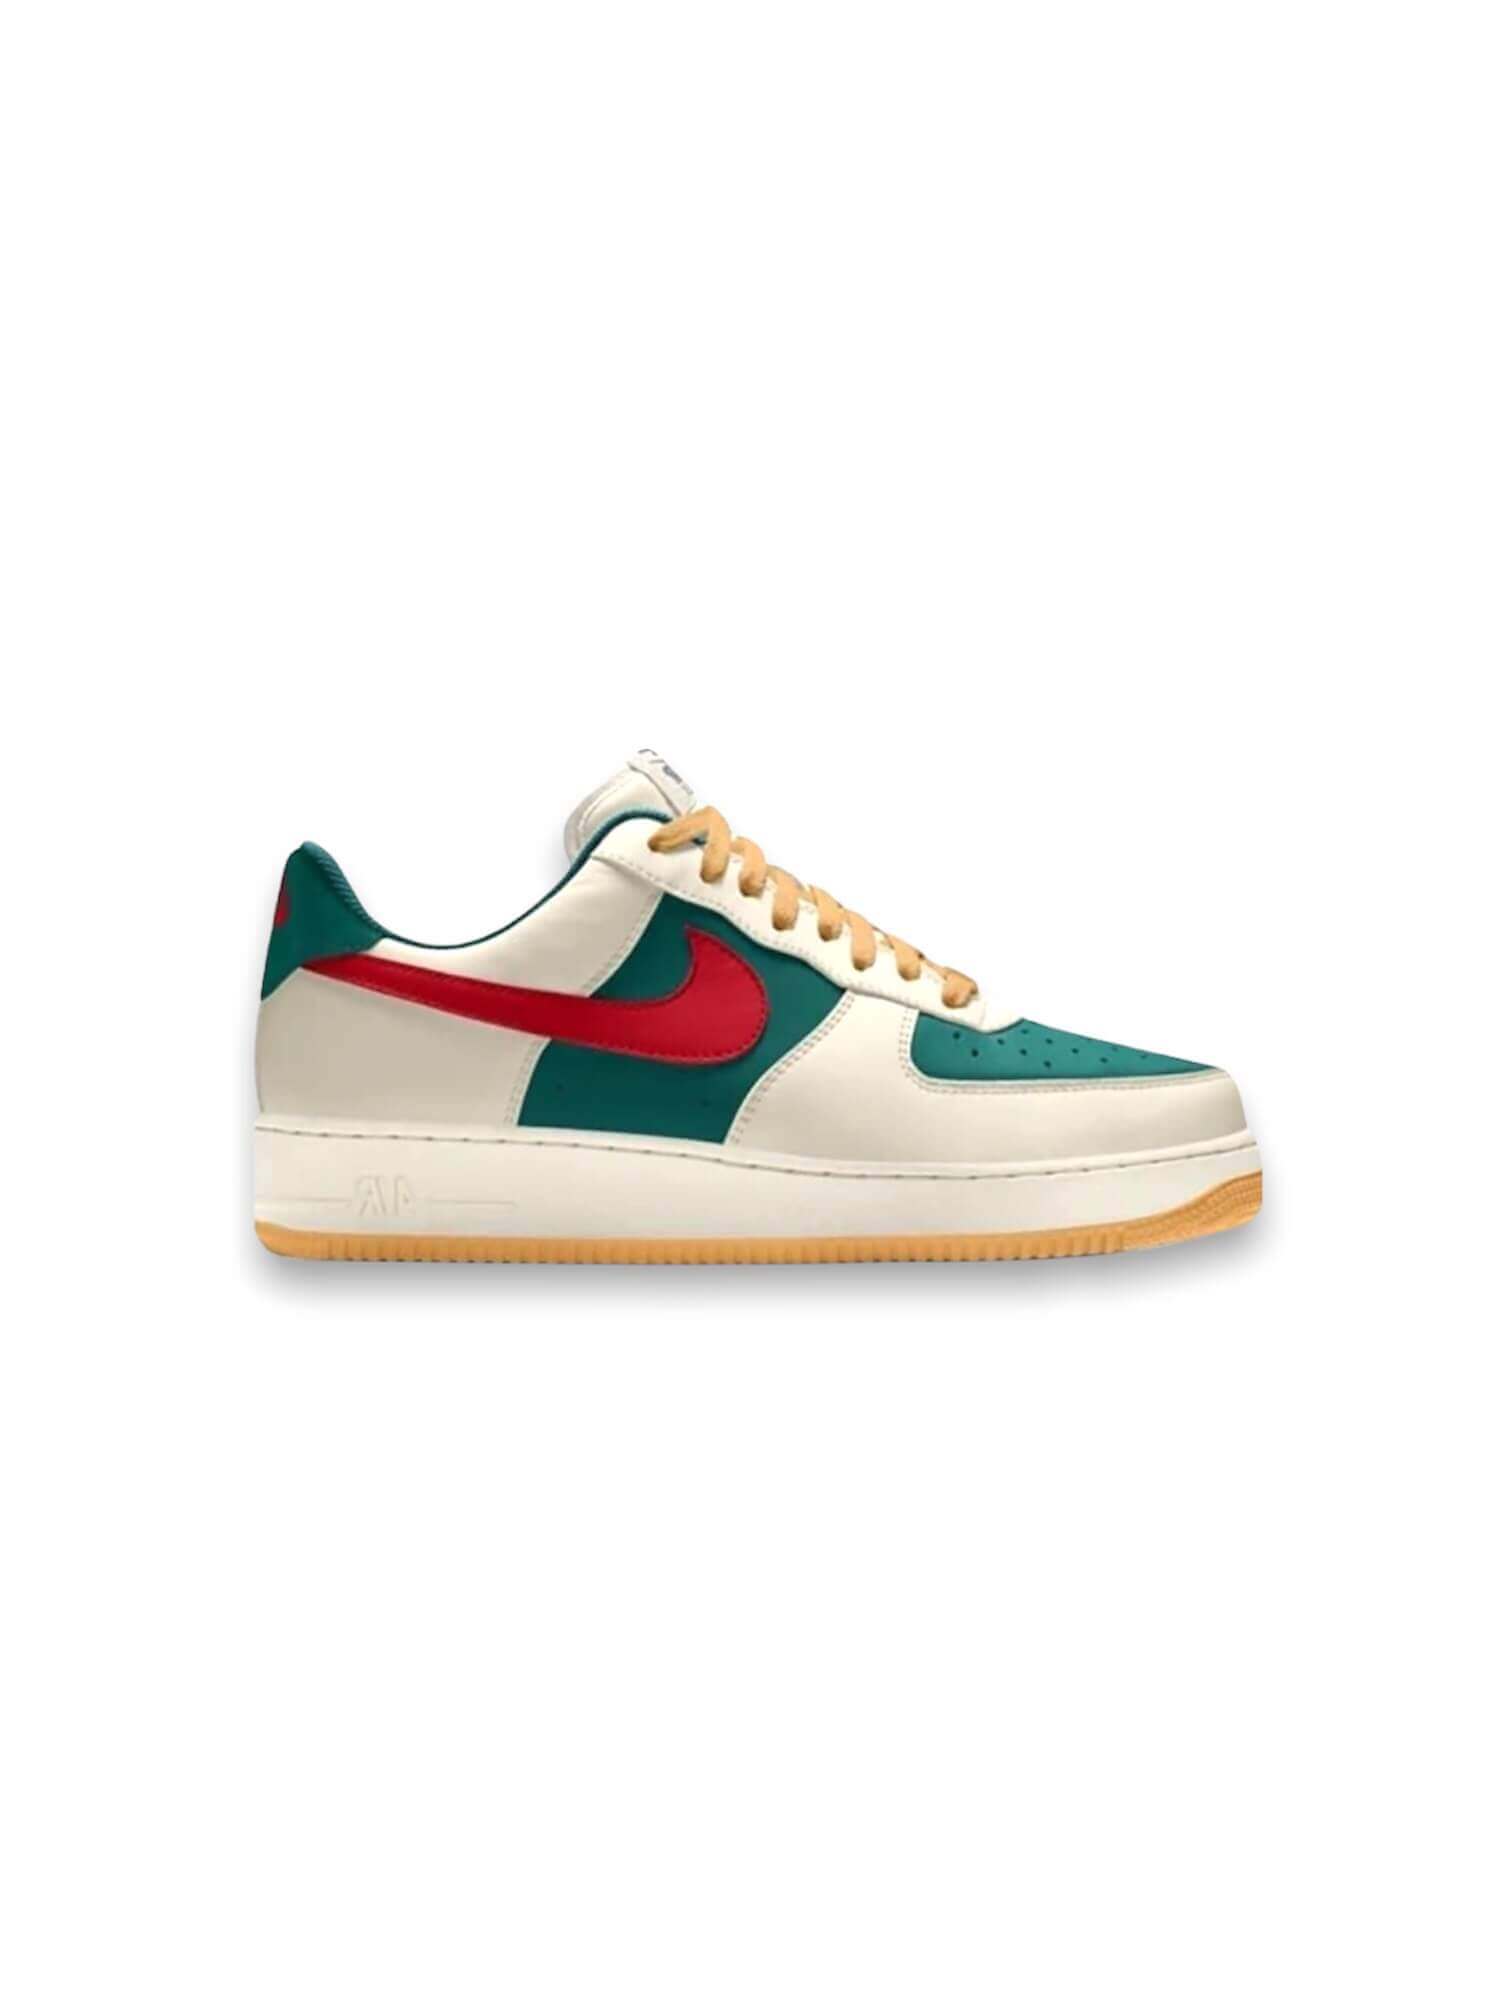 AF1 Gucci - Giày Nike Air Force 1 ID Gucci Rep 11